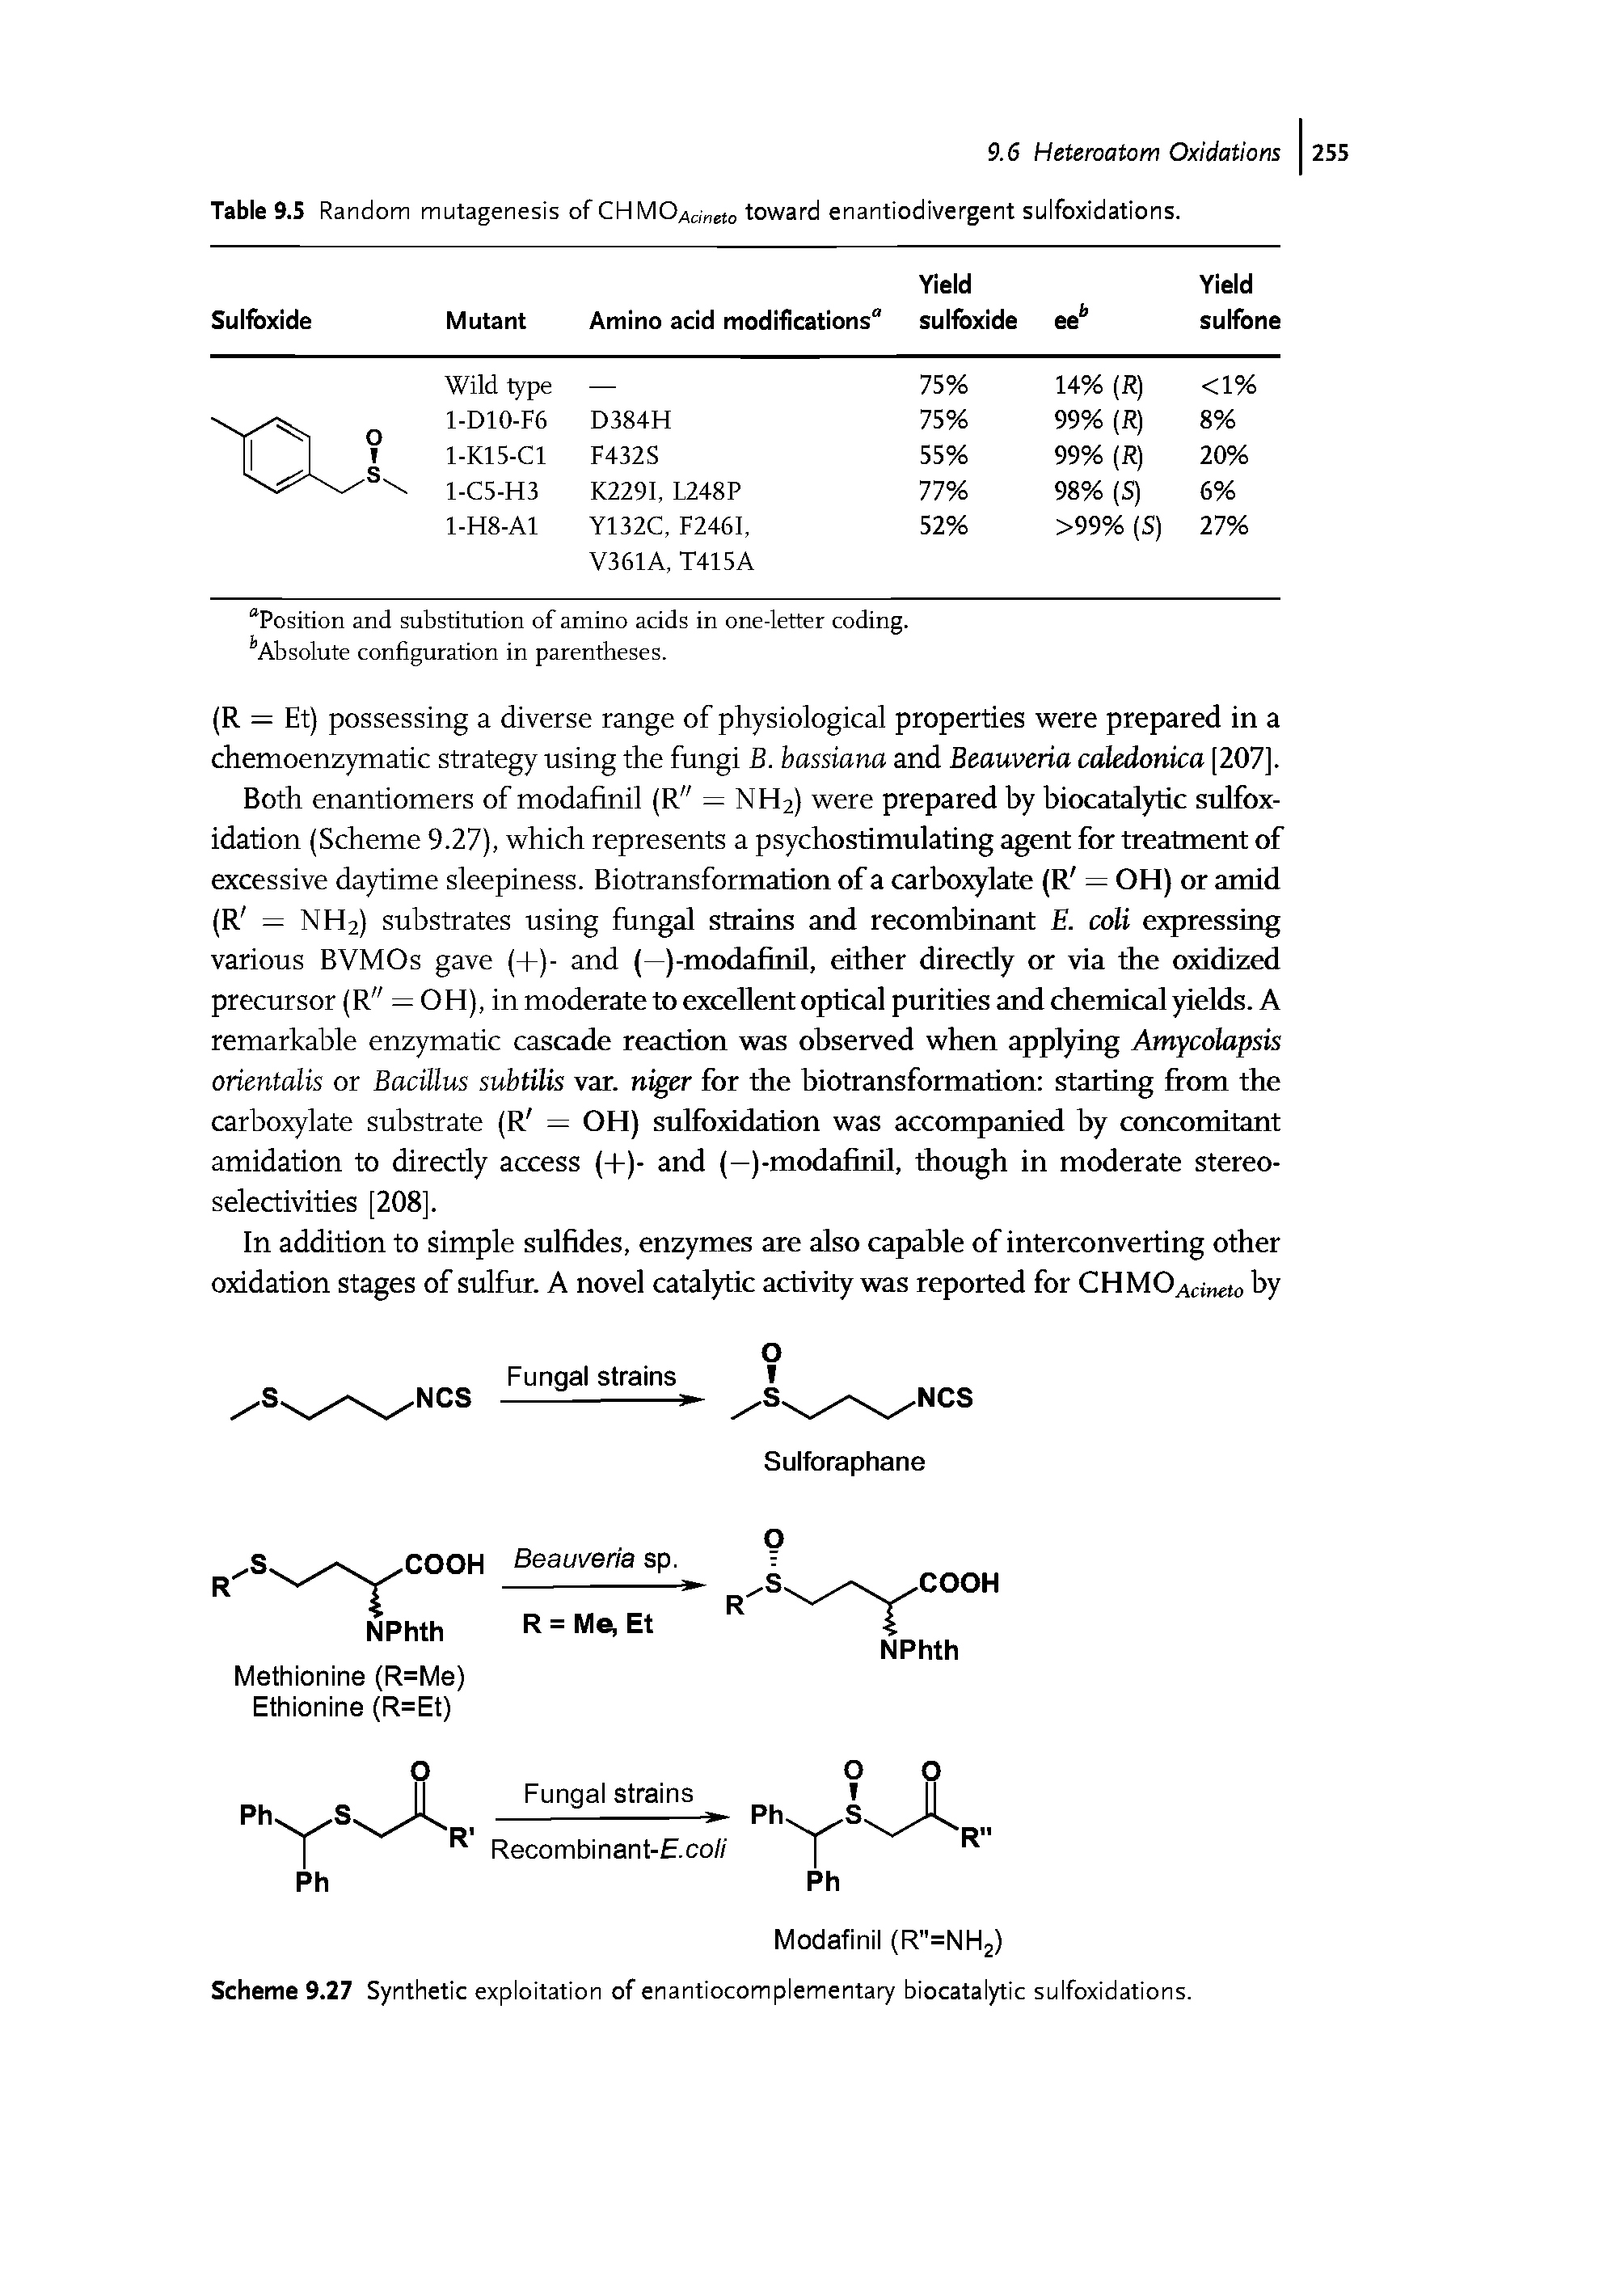 Scheme 9.27 Synthetic exploitation of enantiocomplementary biocatalytic sulfoxidations.